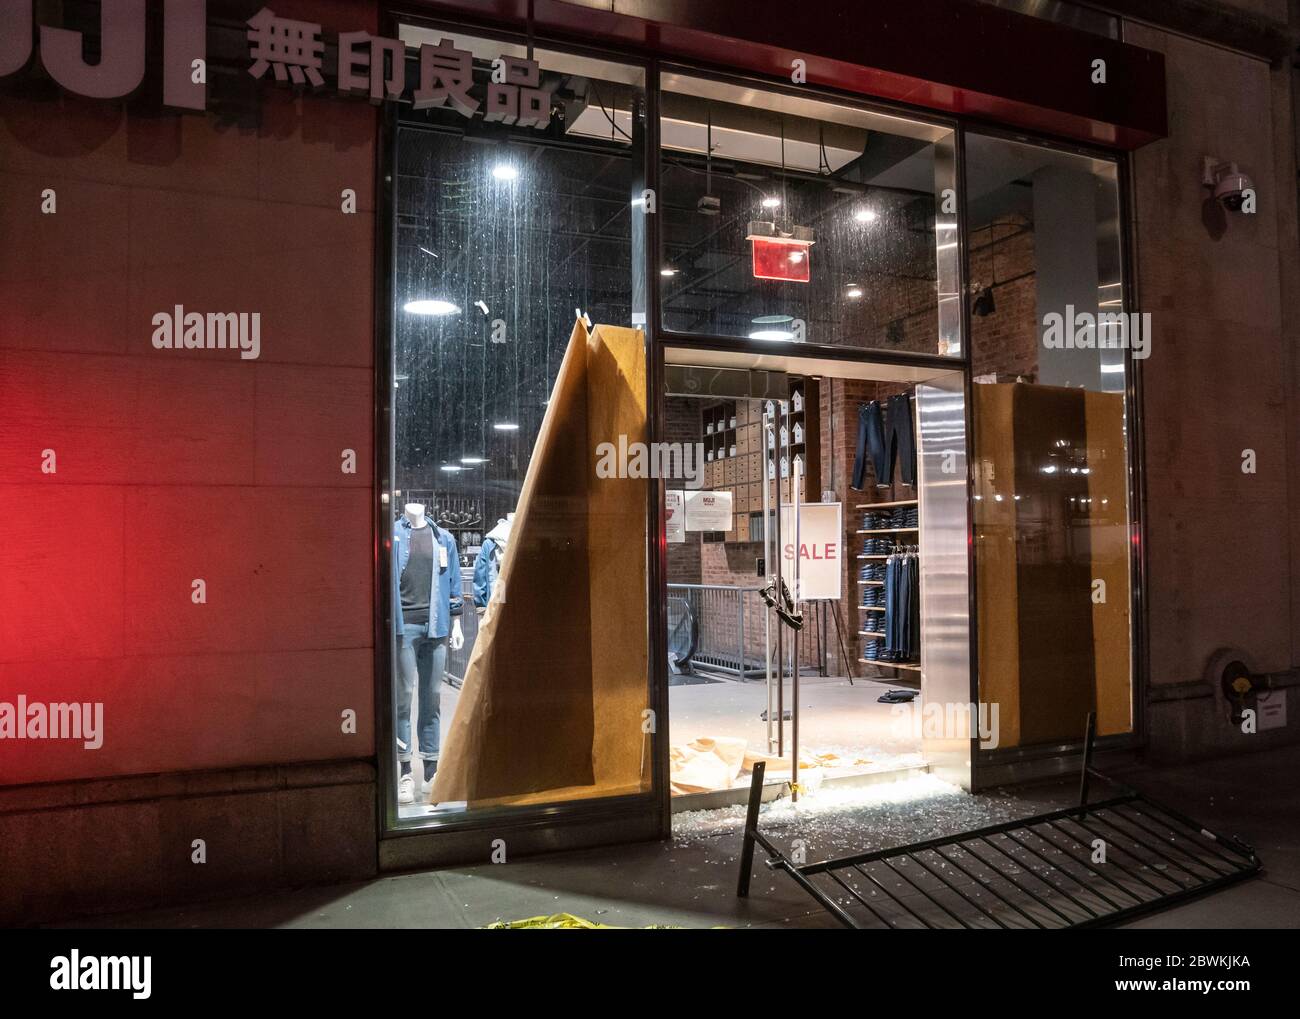 New York, NY - June 1, 2020: Protests turn into looting and destructions in Manhattan before first curfew imposed. View of Muji store broken windows and looted. Stock Photo